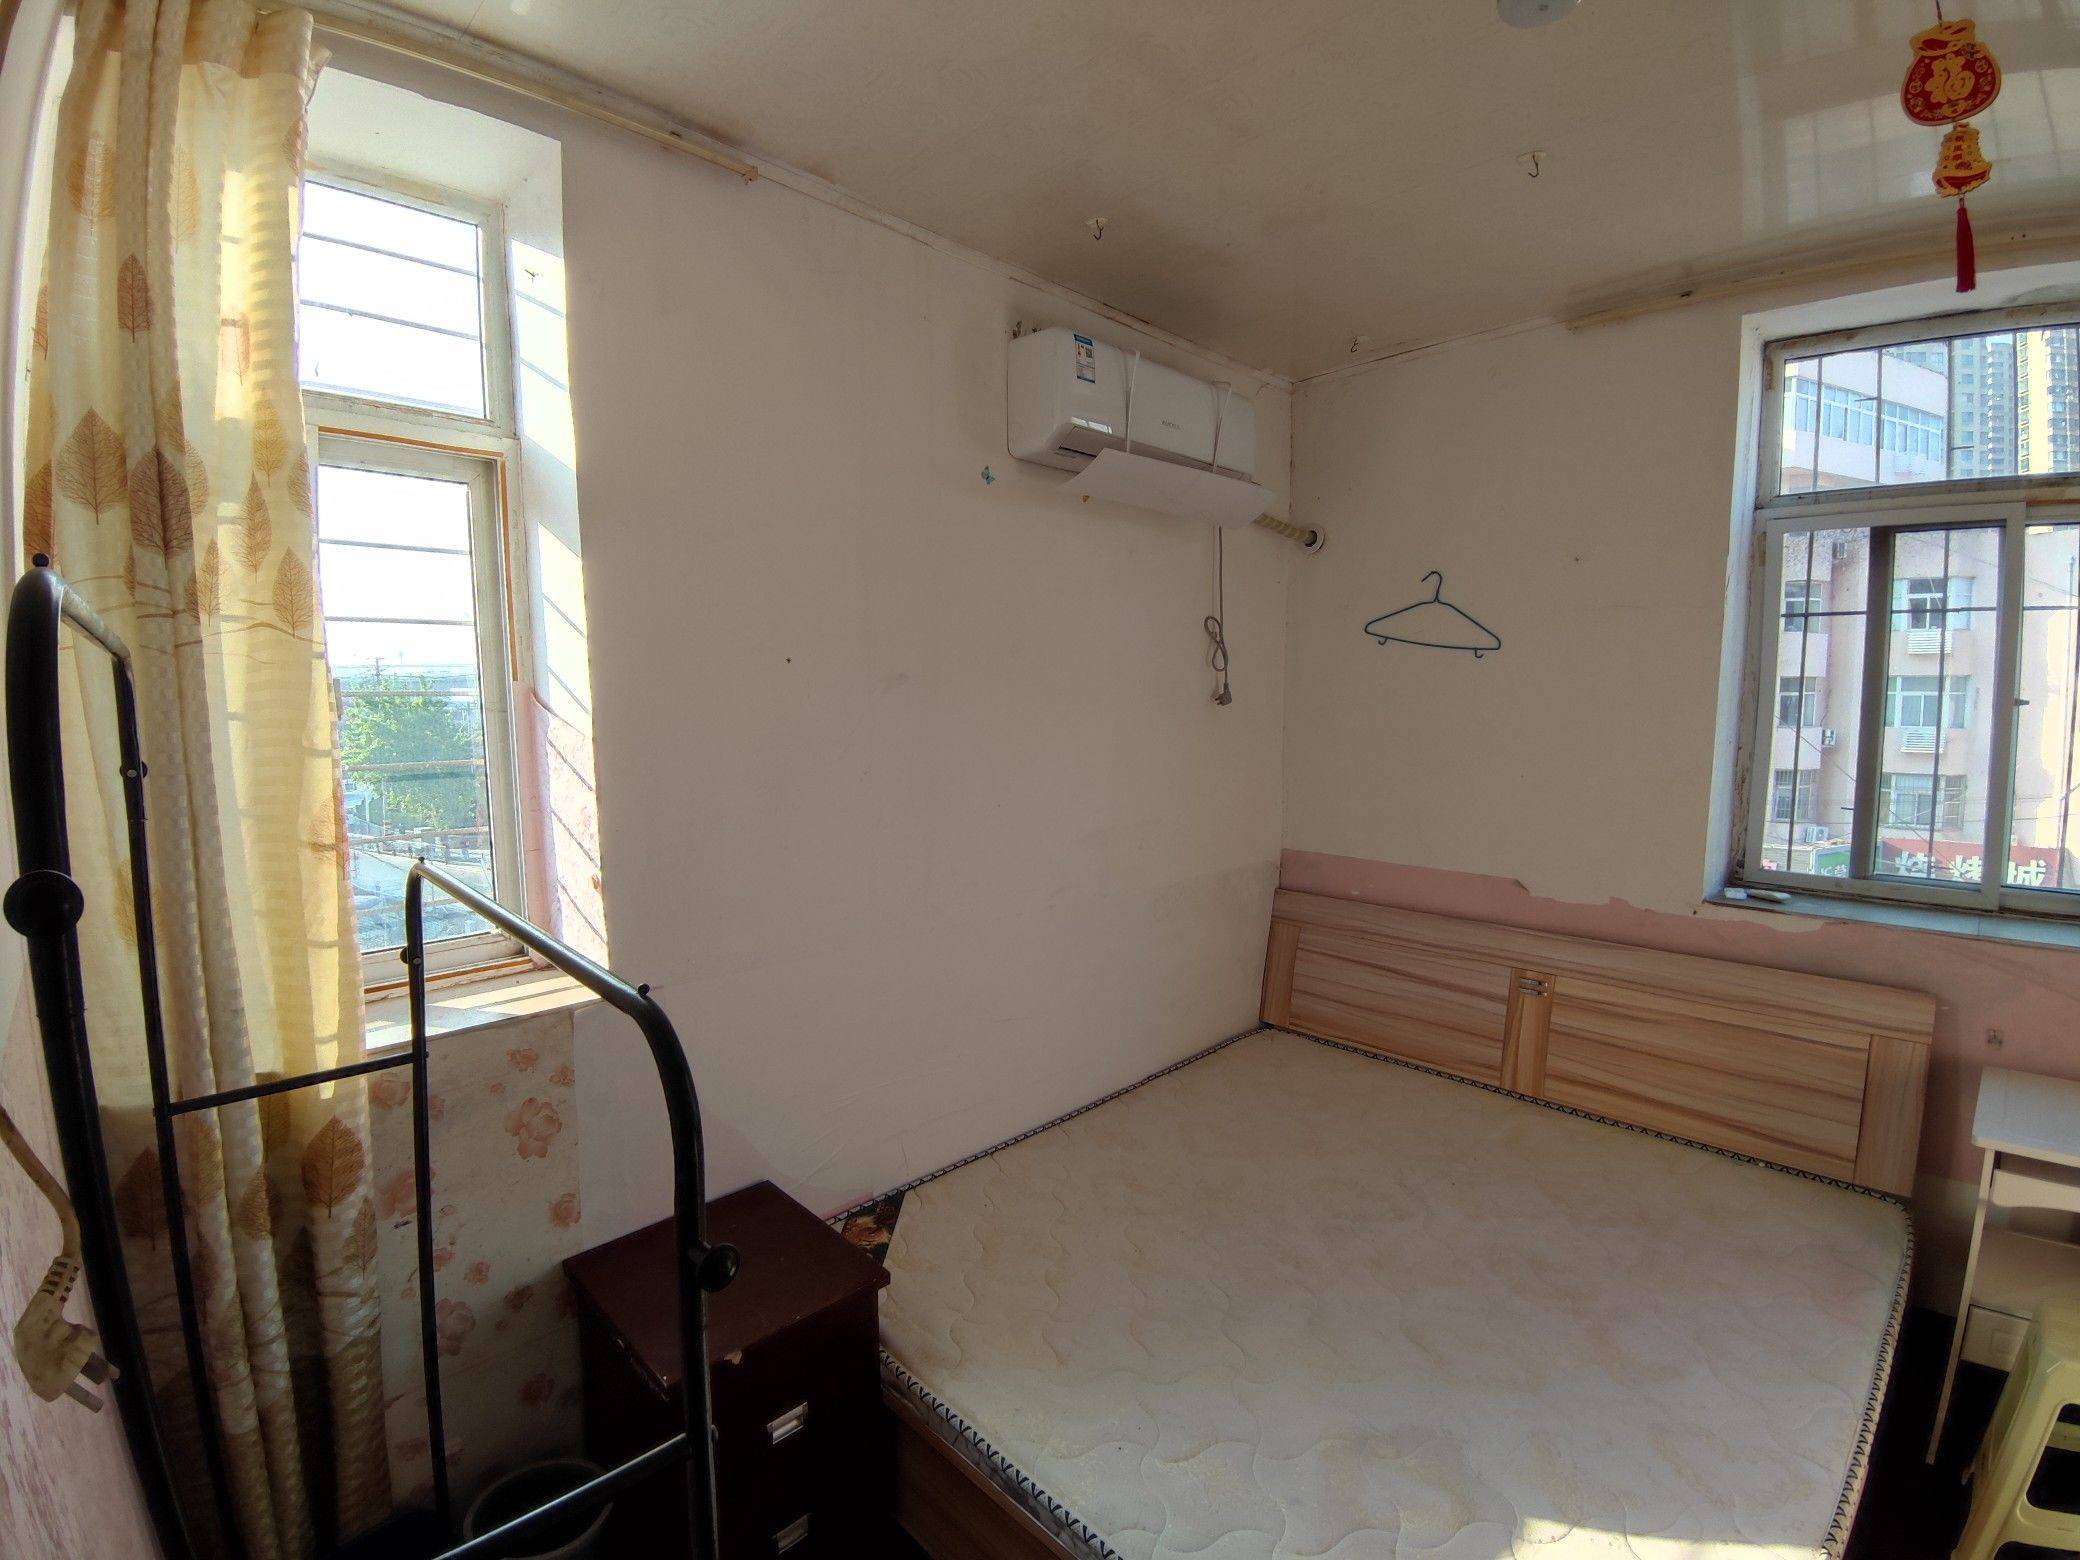 Qingdao-Shibei-Cozy Home,Clean&Comfy,No Gender Limit,Chilled